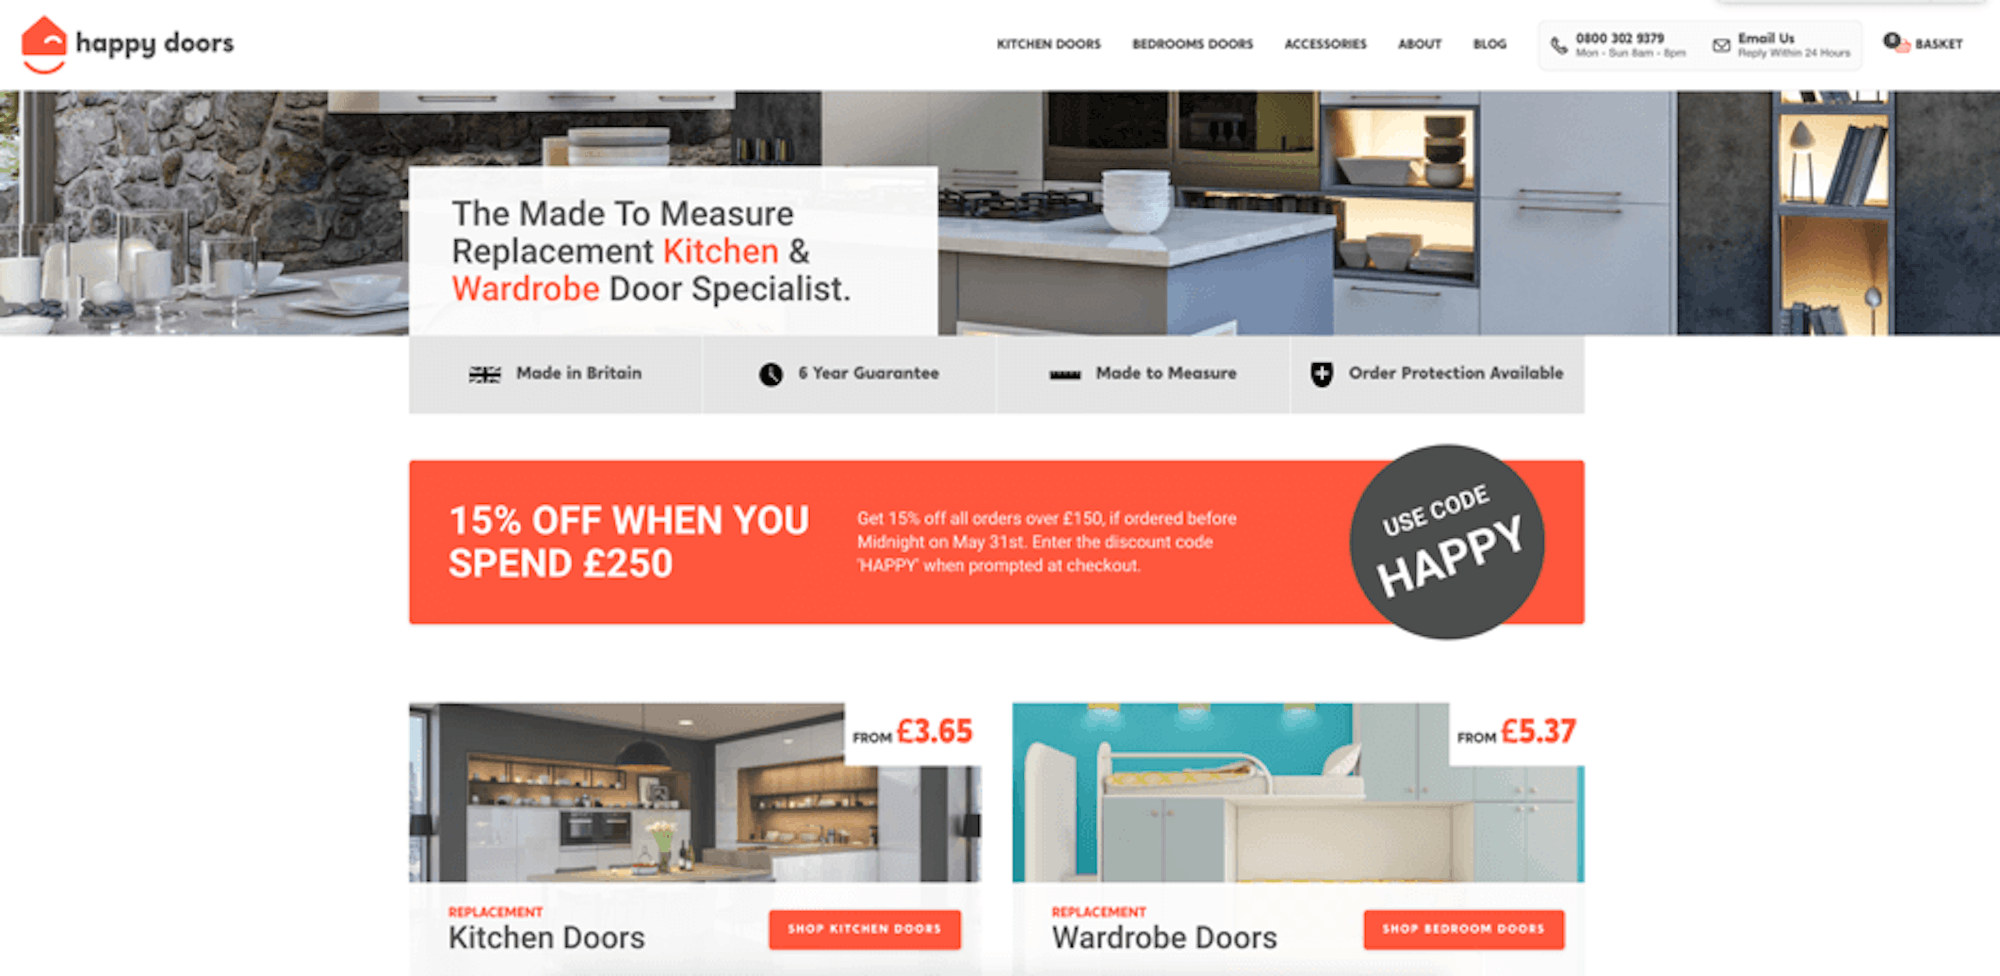 Happy Doors' home page. Gives their users the ability to dive into categories straight away. Designed by Bigger Picture.